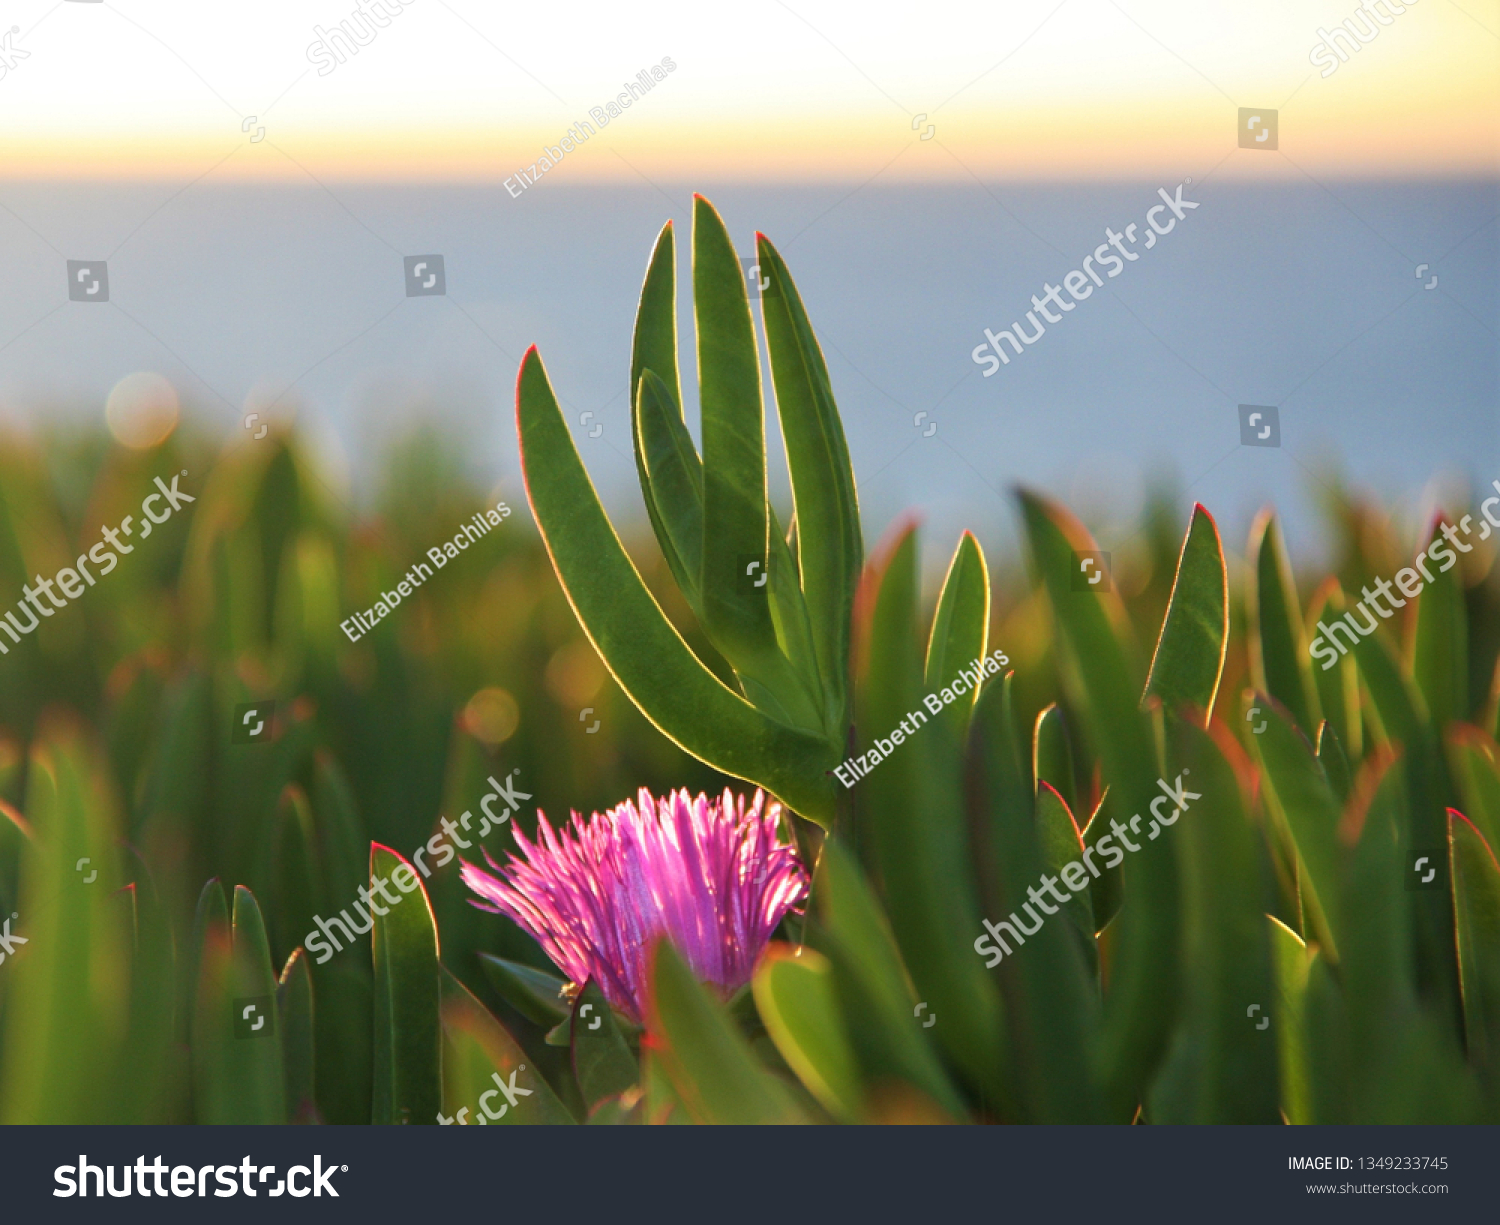 Beautiful lavender spiked flower with long, green, finger-like foliage in the foreground and foliage running into the distance. #1349233745